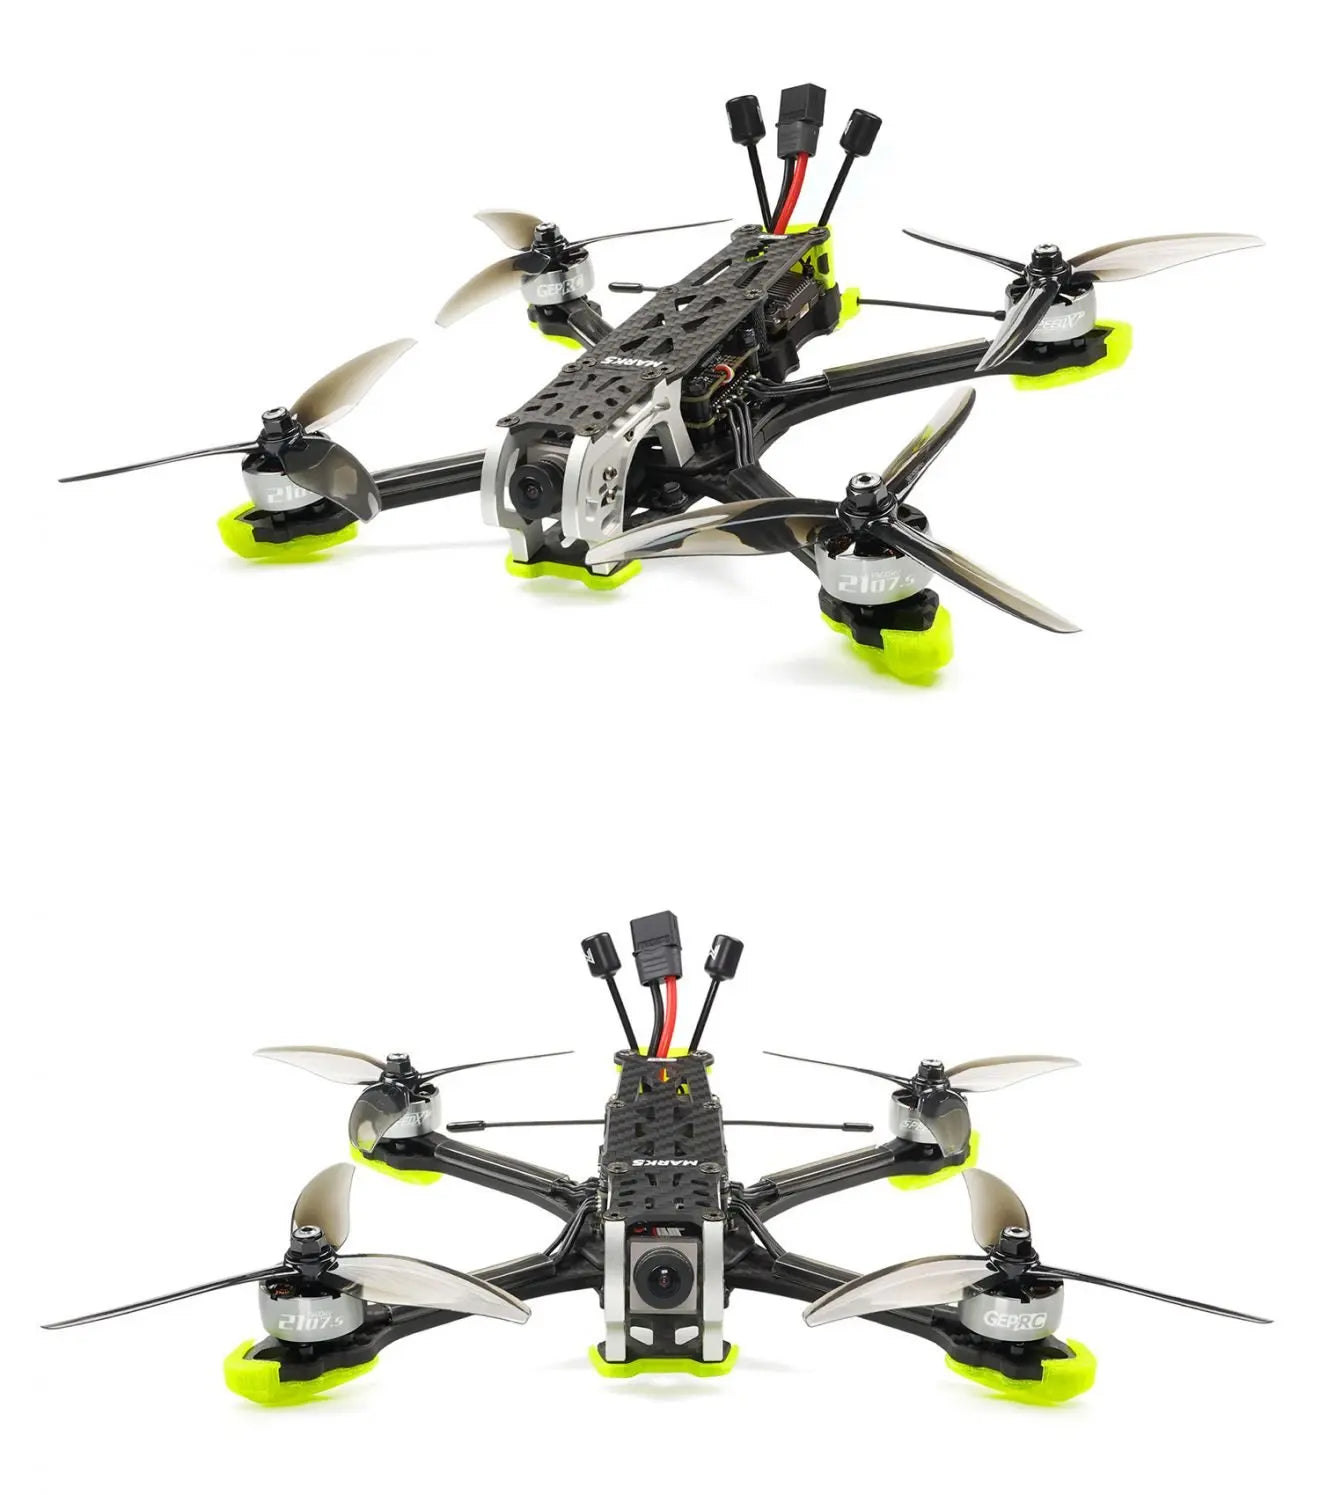 MARK5 HD AVATAR Freestyle FPV Drone, aluminum alloy side plates not only look stunning but reduce weight and add more endurance